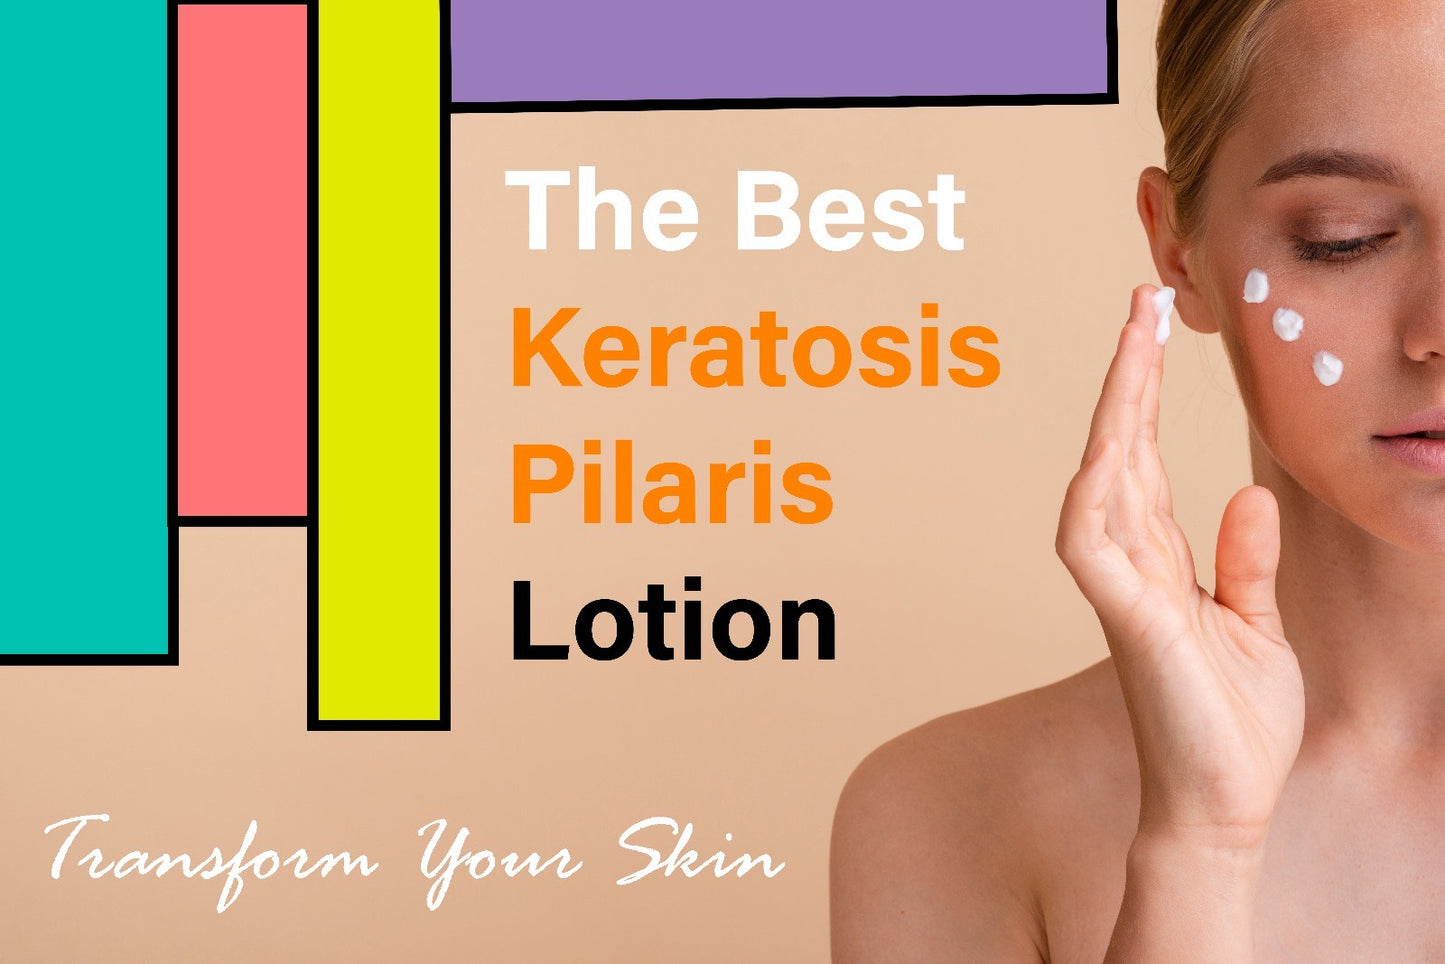 Transform Your Skin: The Best Lotion for Keratosis Pilaris